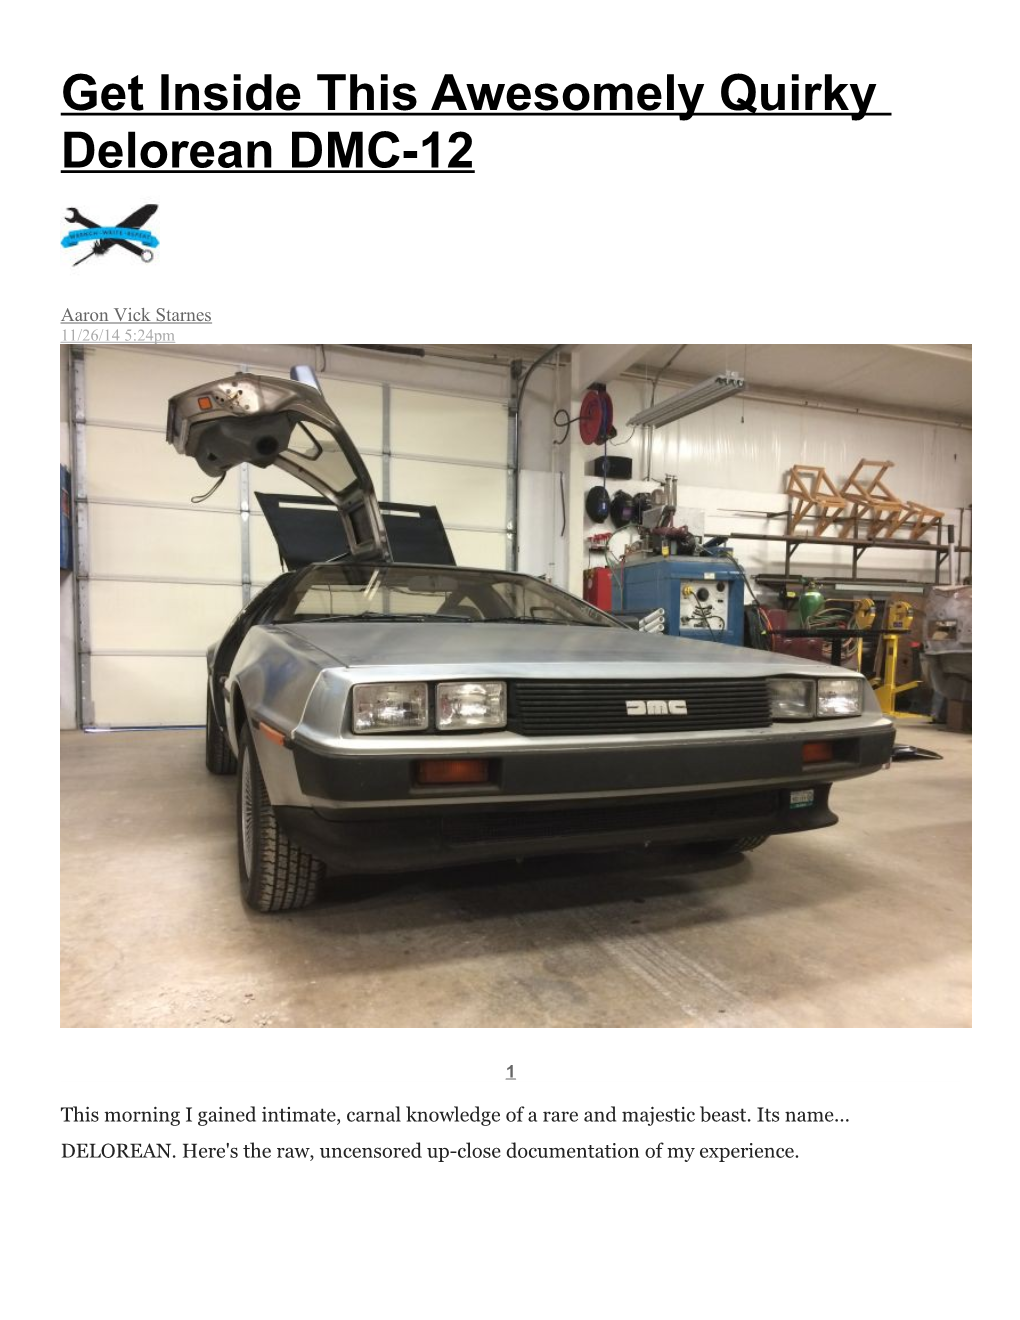 Get Inside This Awesomely Quirky Delorean DMC-12